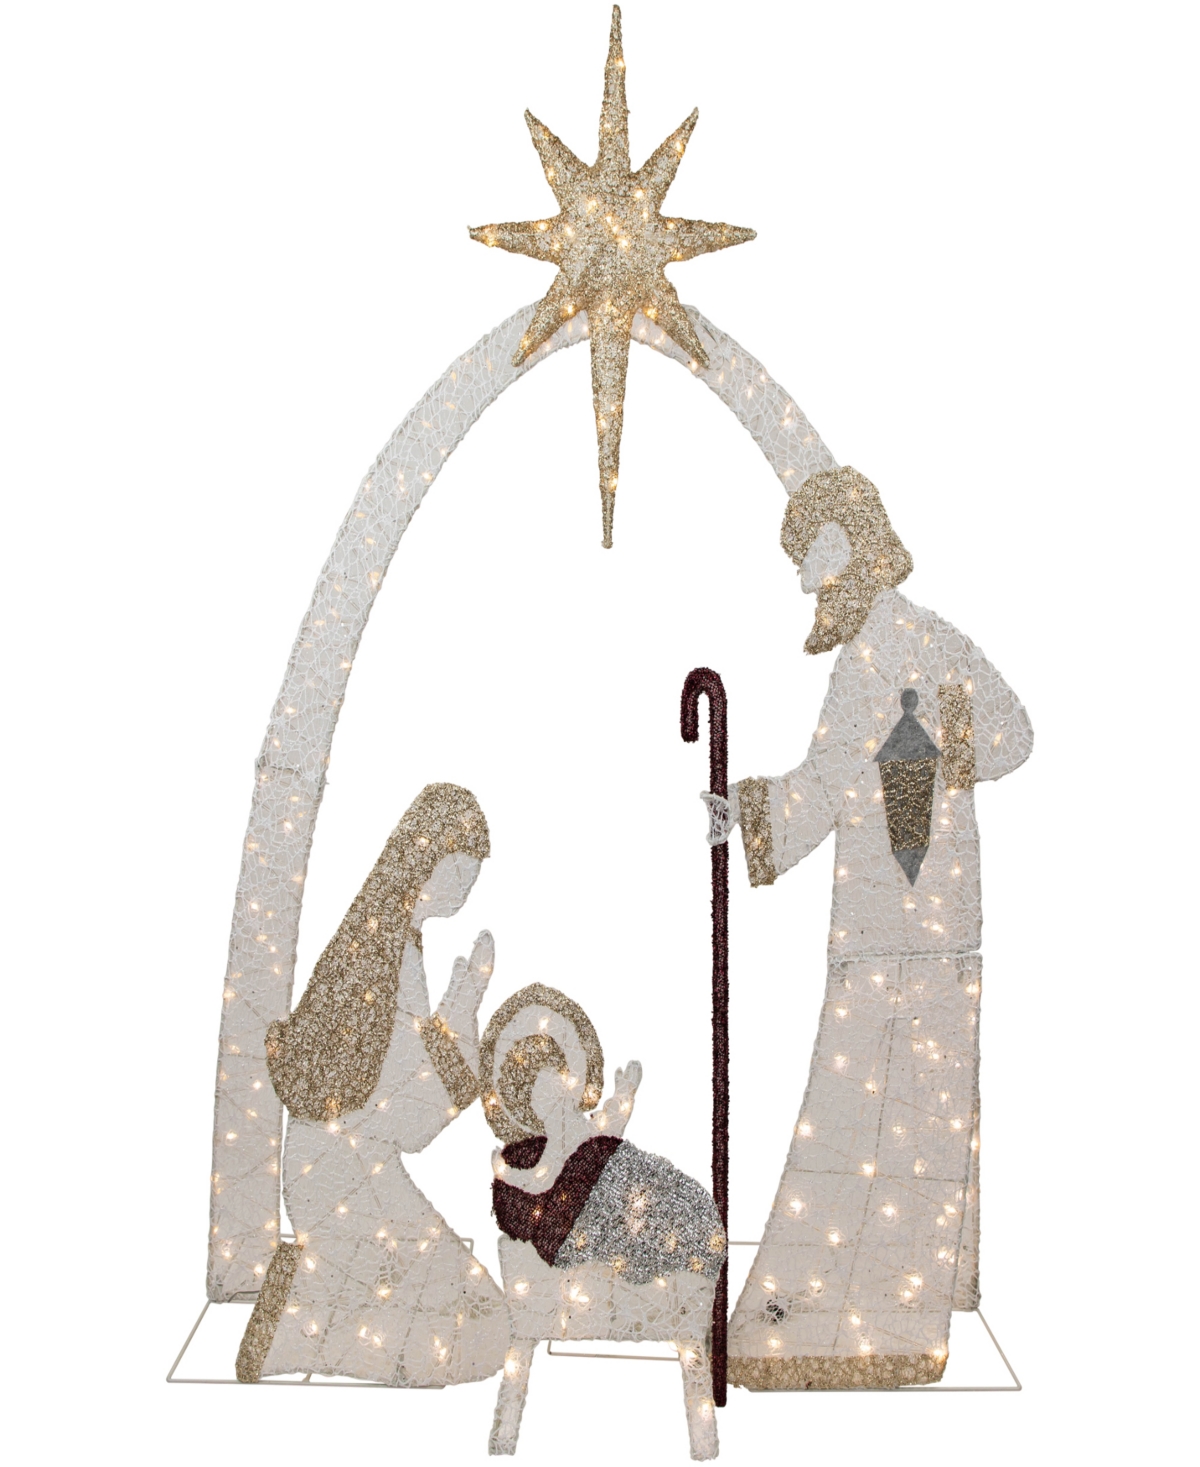 Northlight 6.75' Light Emitting Diode (led) Lighted Holy Family Nativity Scene Outdoor Christmas Decoration In White